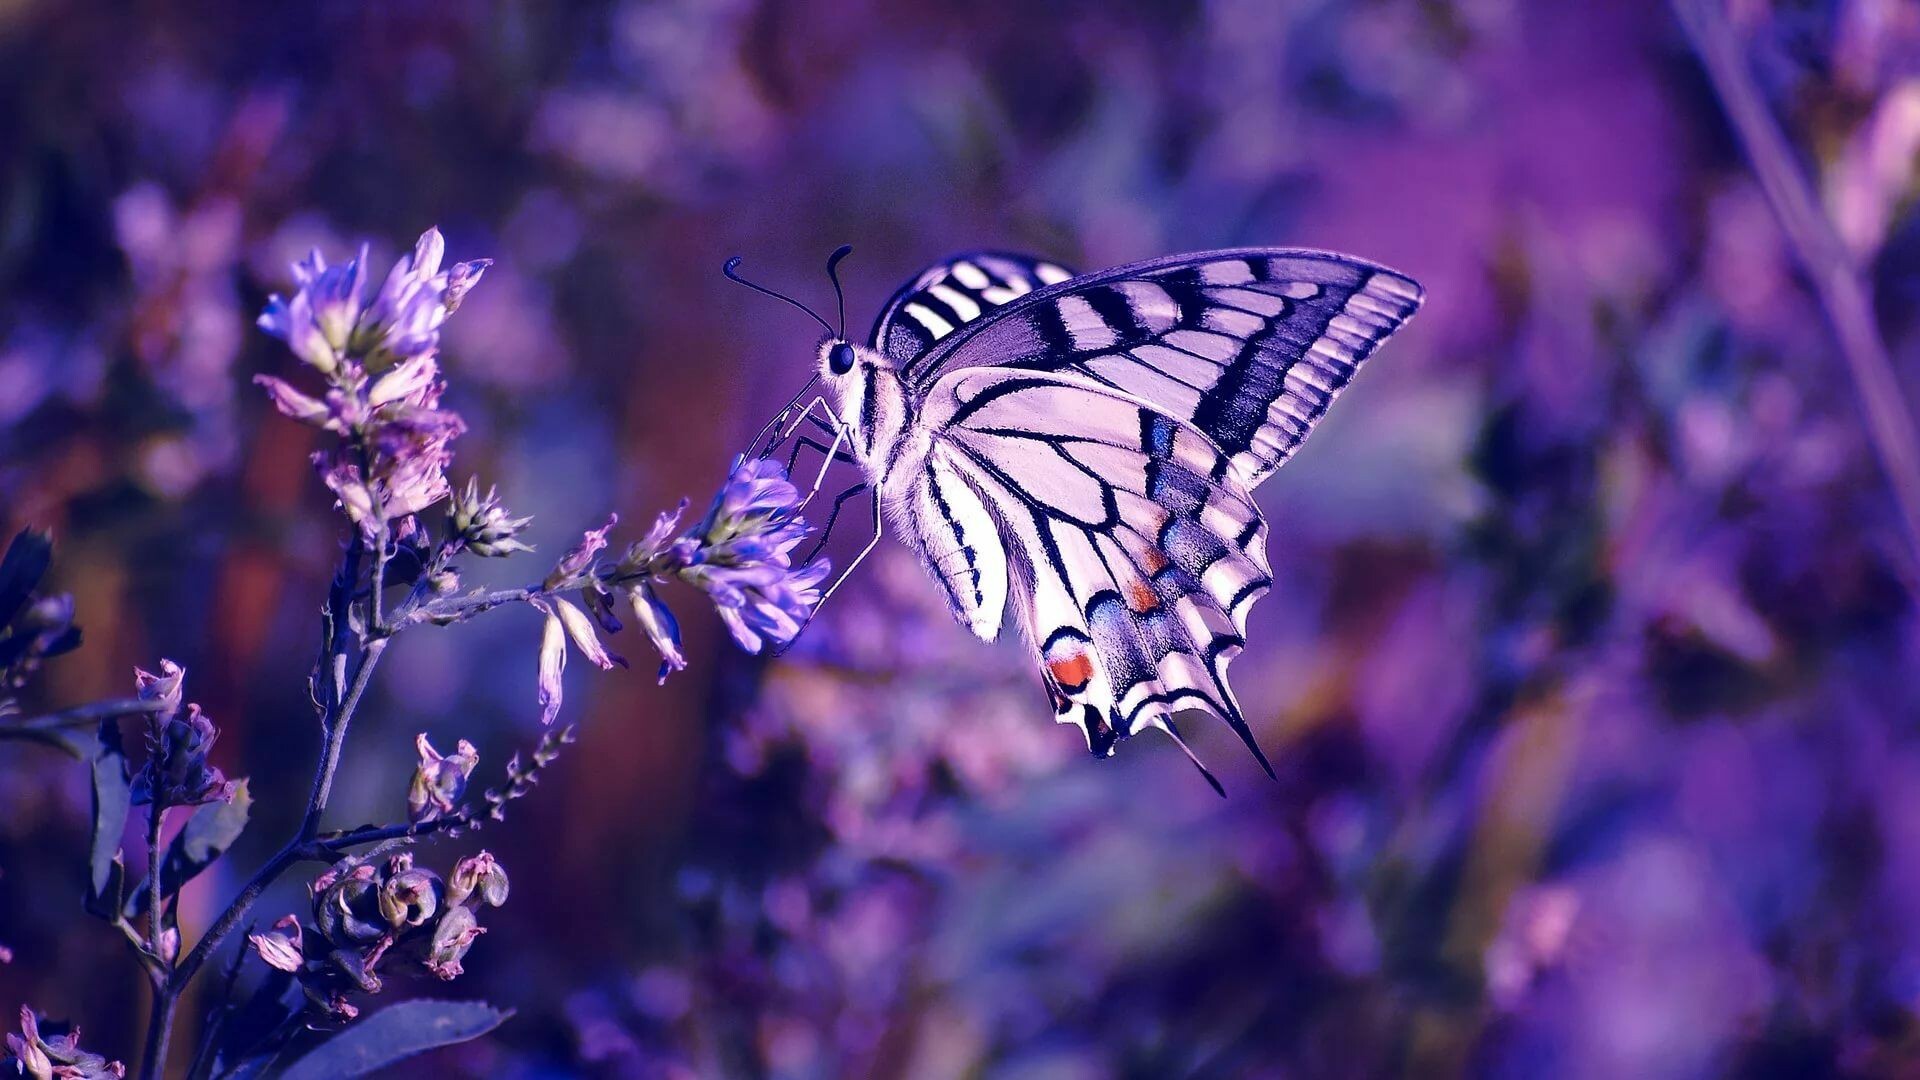 Nice butterfly wallpapers, Serene atmosphere, Delicate creatures, Exquisite patterns, 1920x1080 Full HD Desktop